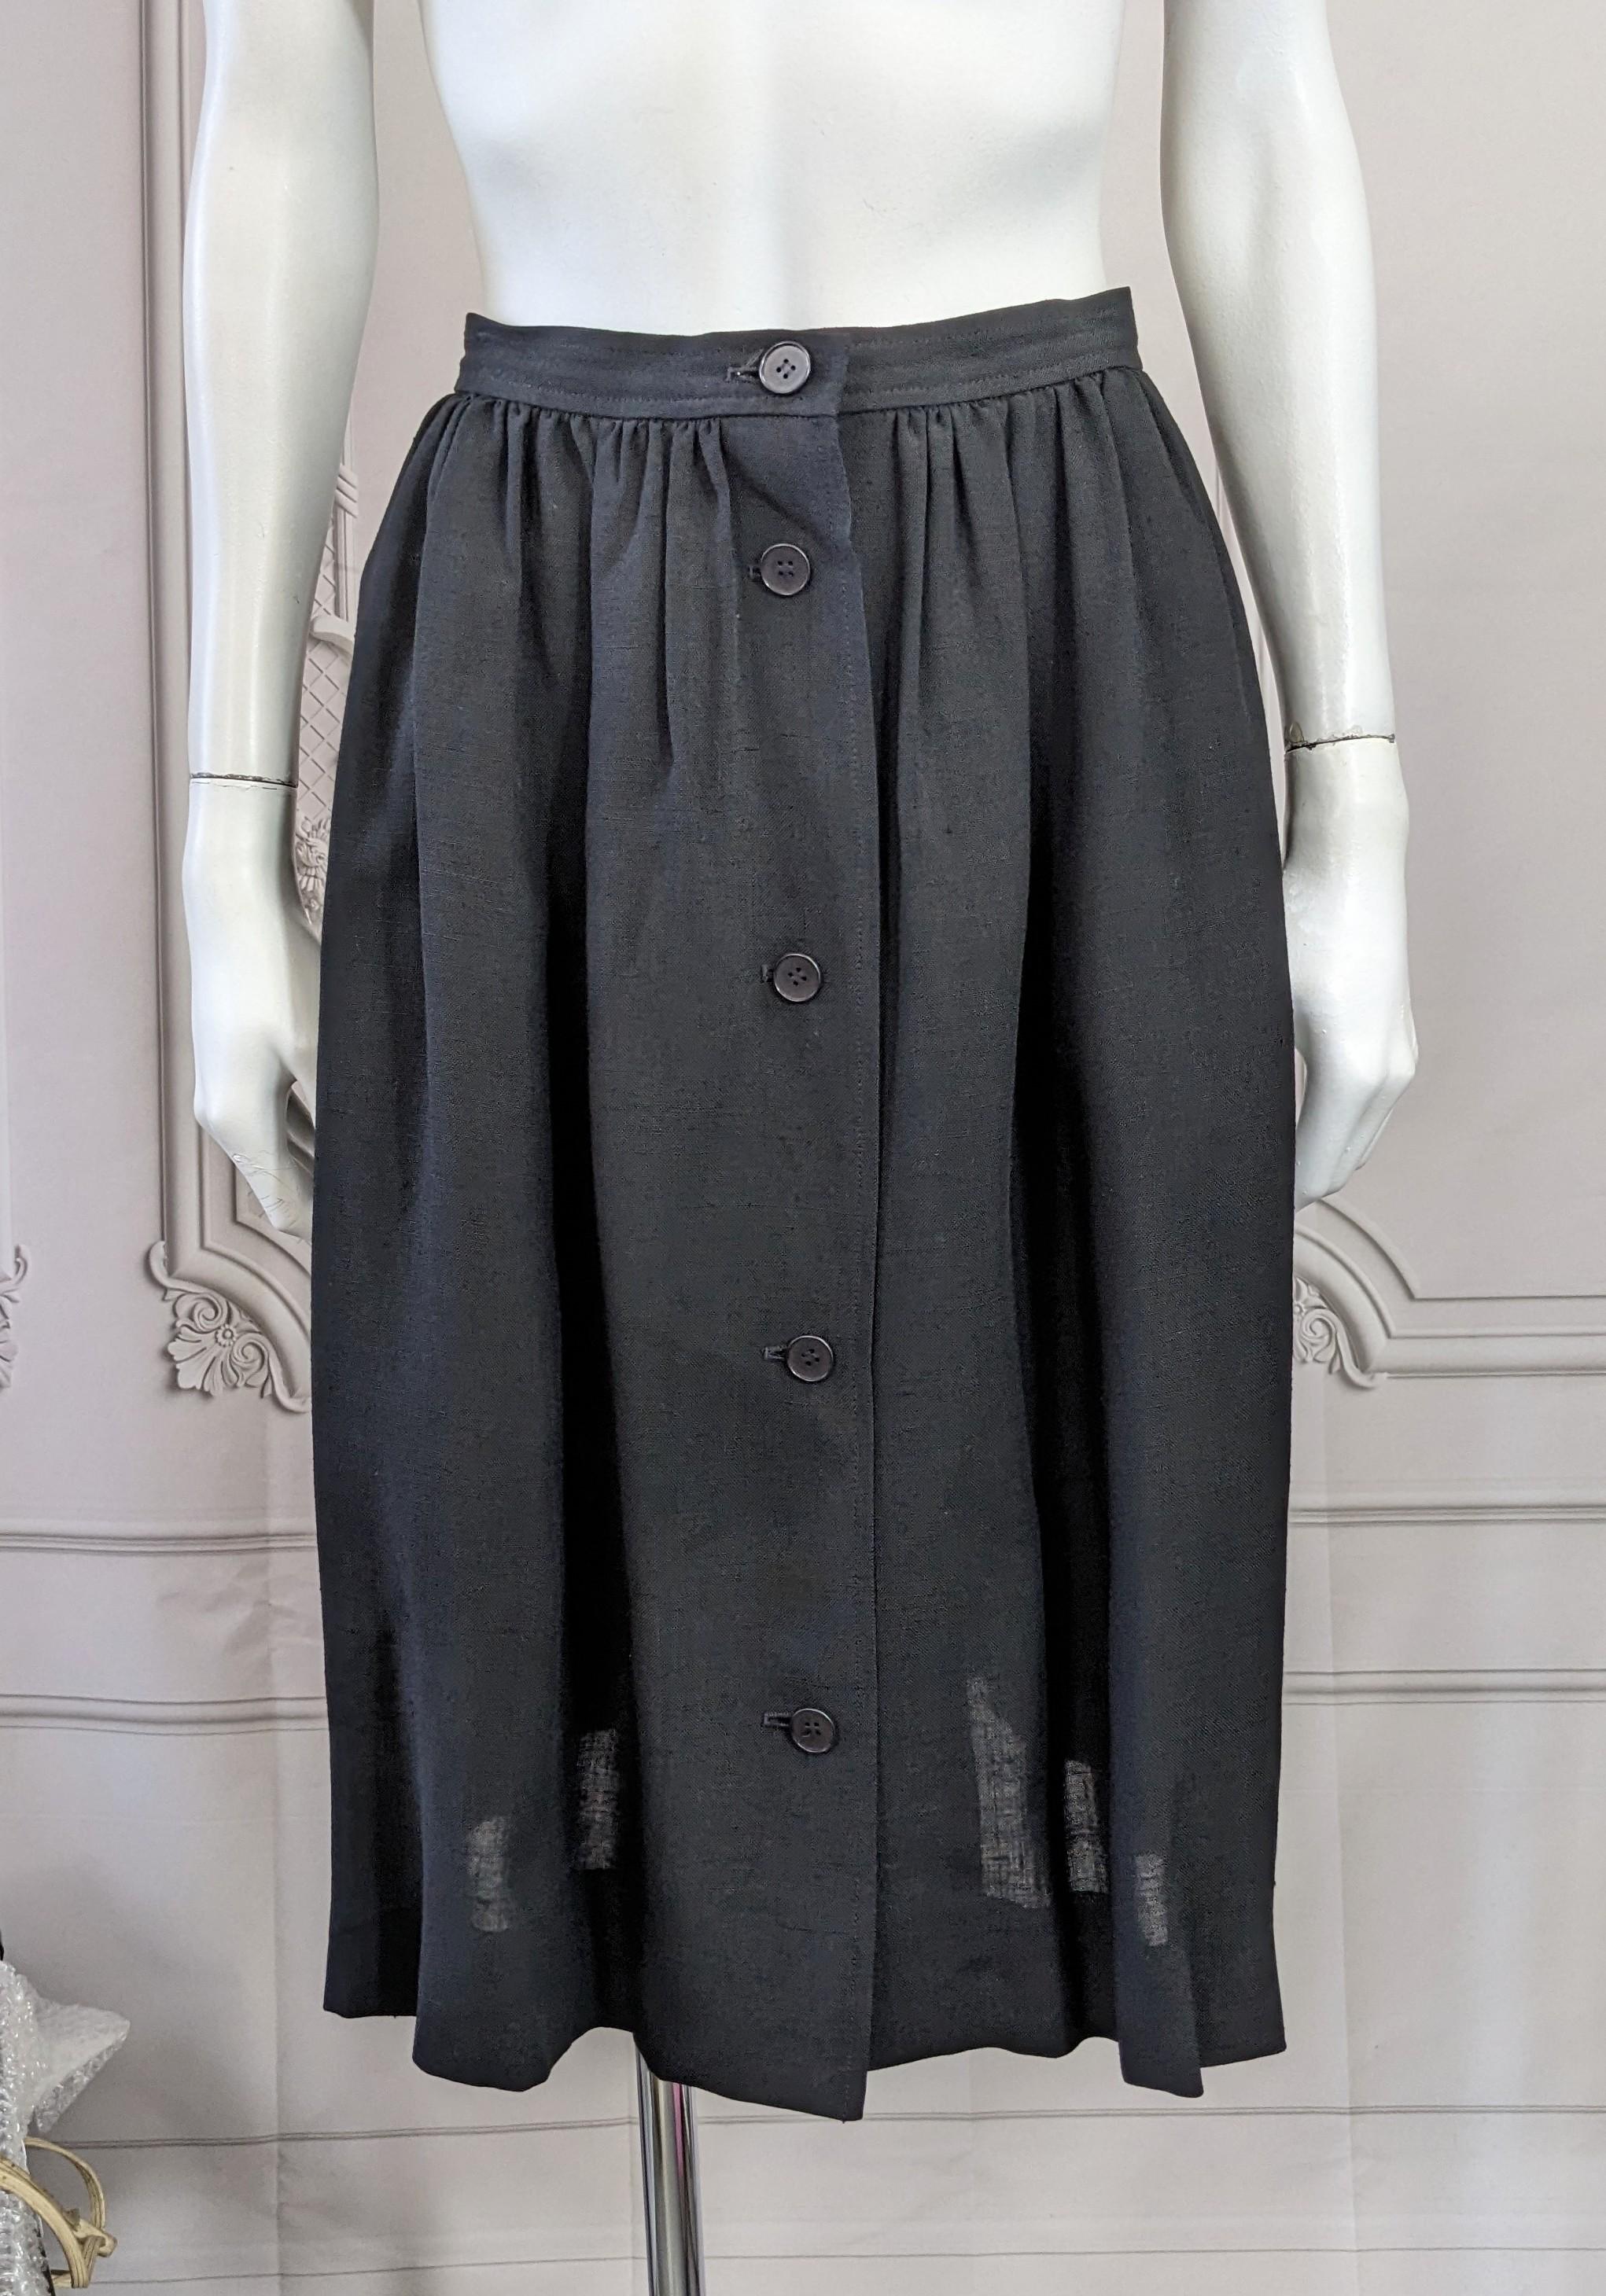 Yves Saint Laurent Fibranne Skirt, Rive Gauche in black rayon linen blend from the 1980's. Full gathers in front with less on back with button front entry. Classic timeless, 1980's France. Vintage size 42.